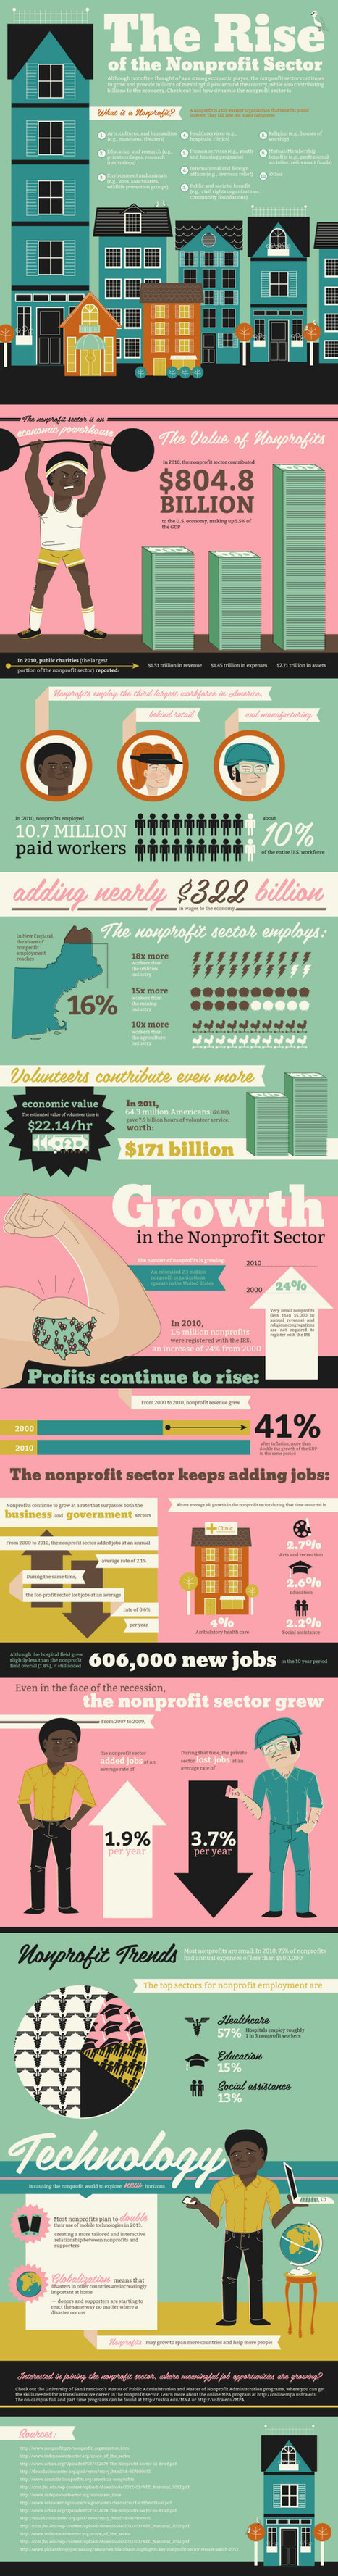 The rise of the non-profit sector [infographic] | Non-Governmental Organizations | Scoop.it